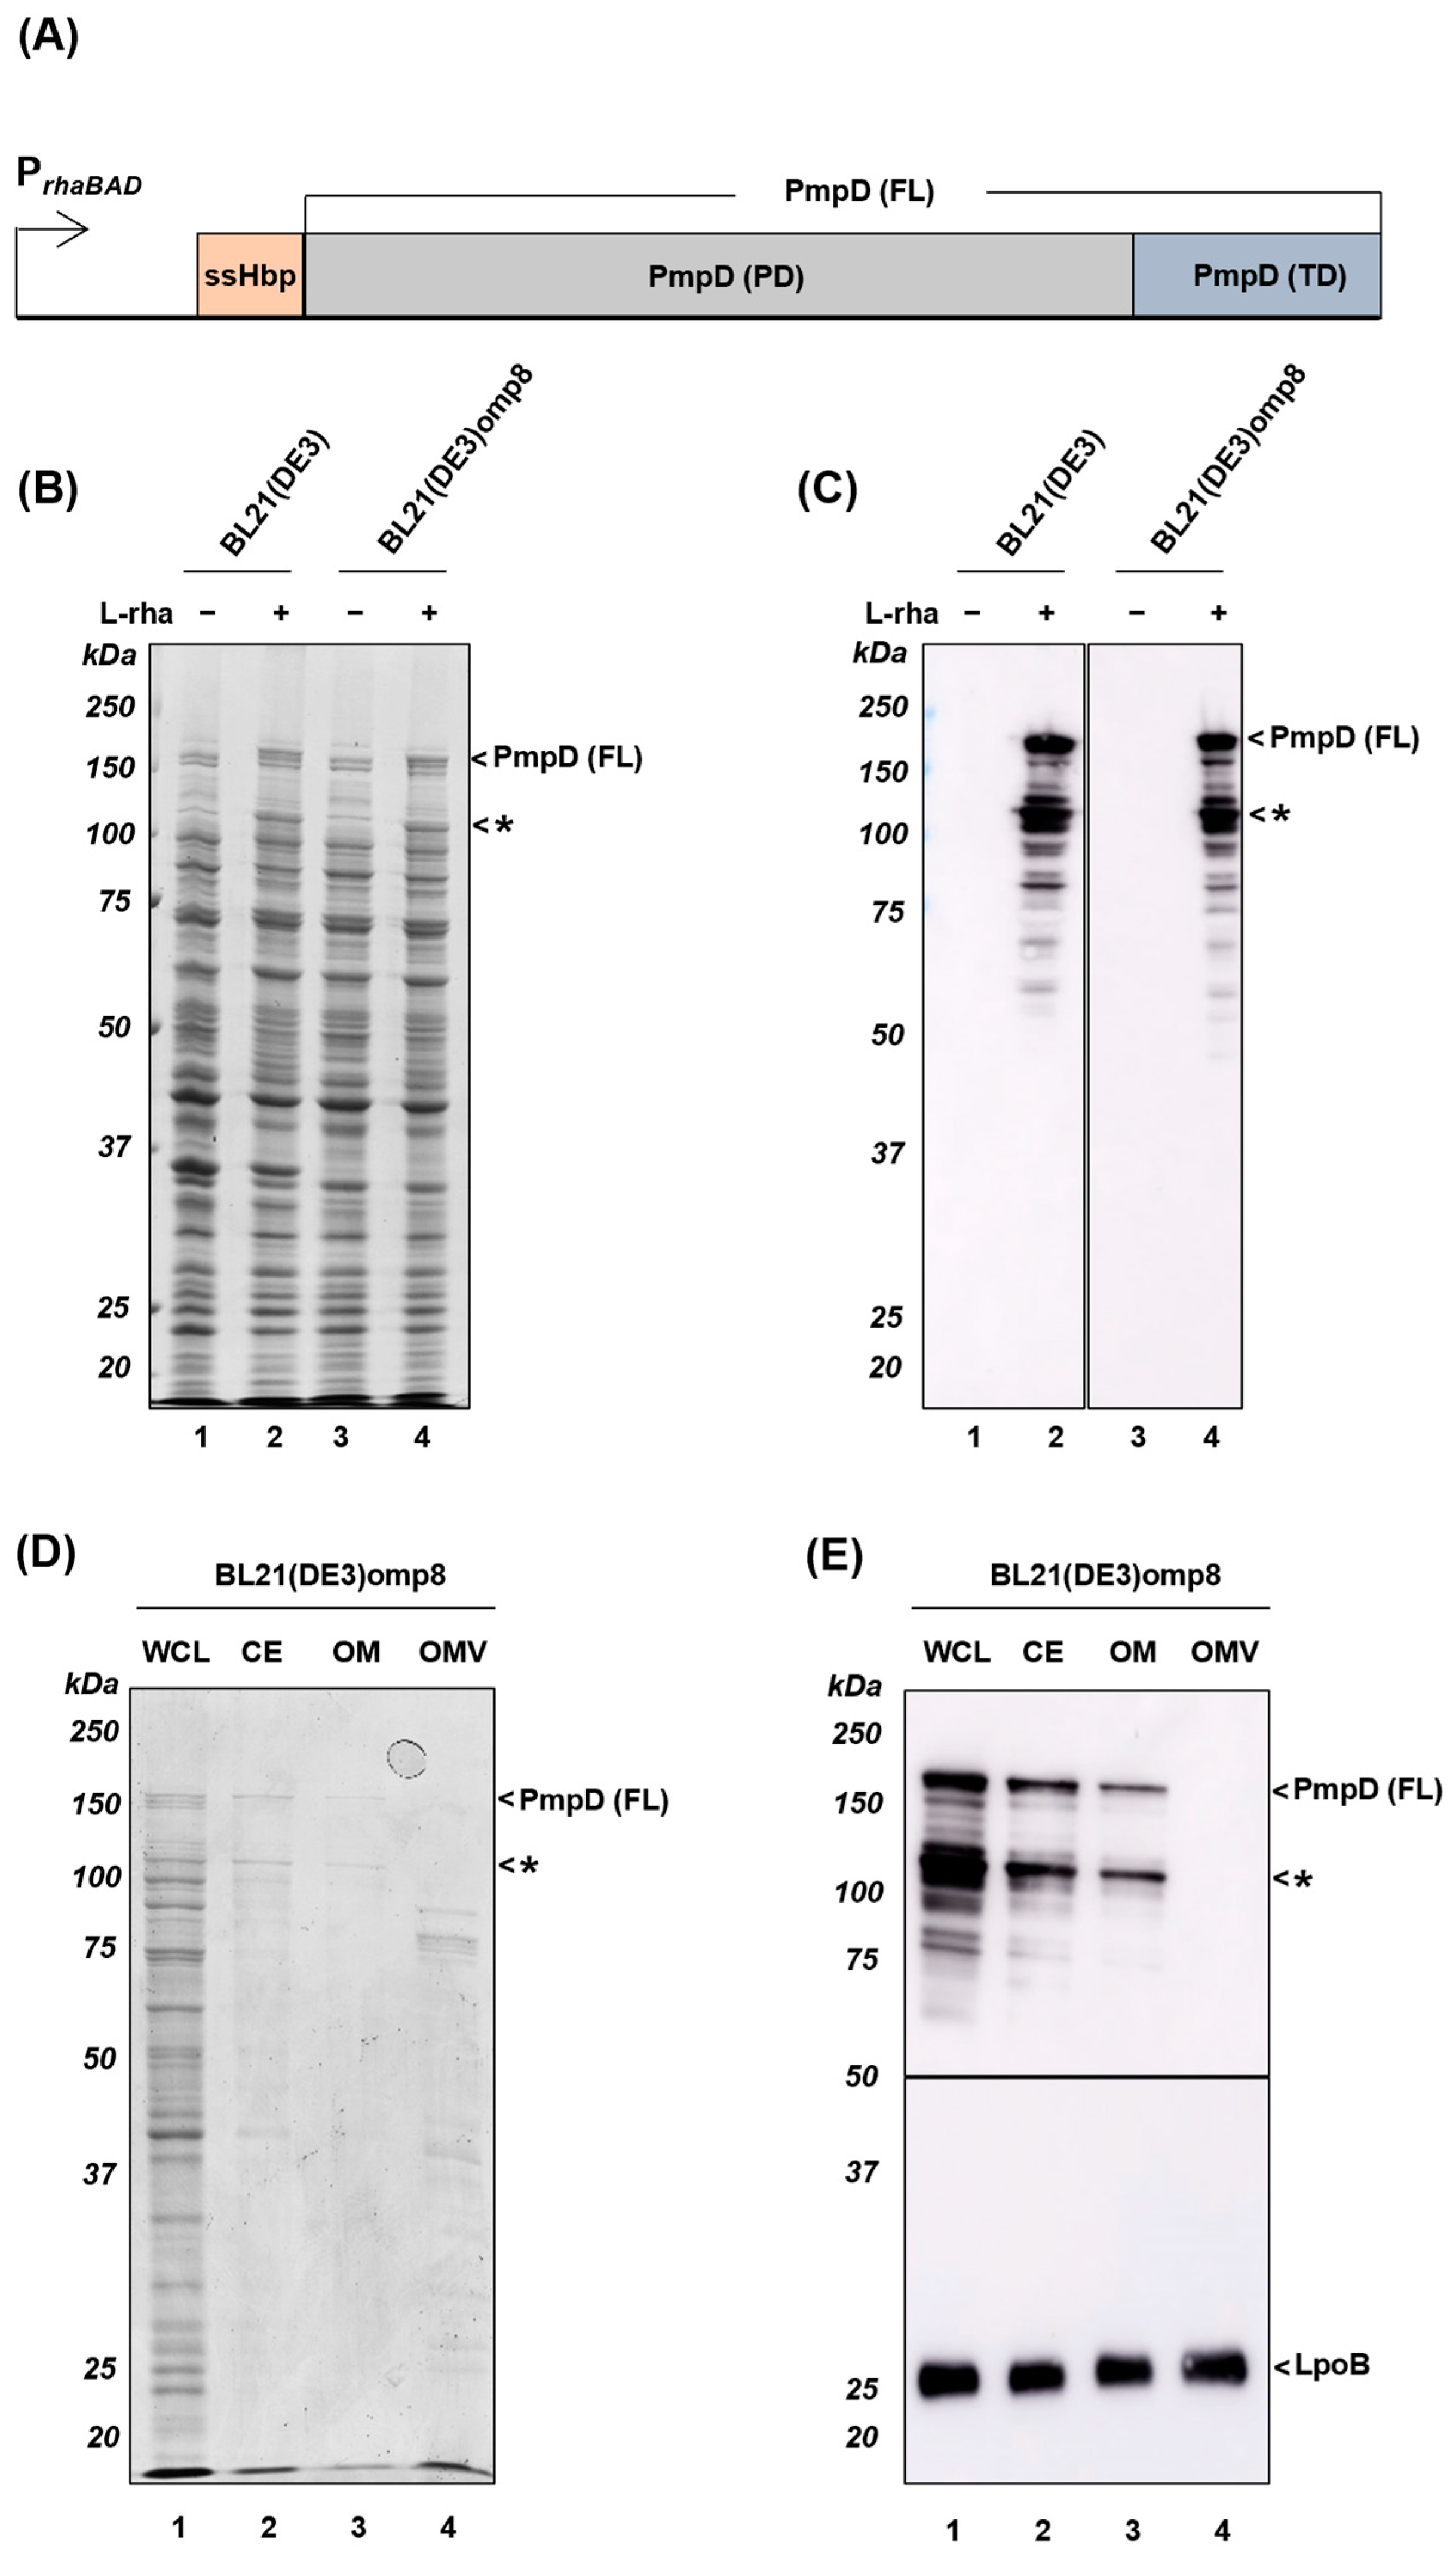 Full article: Intranasal and Intramuscular Immunization with Outer Membrane  Vesicles from Serogroup C Meningococci Induced Functional Antibodies and  Immunologic Memory